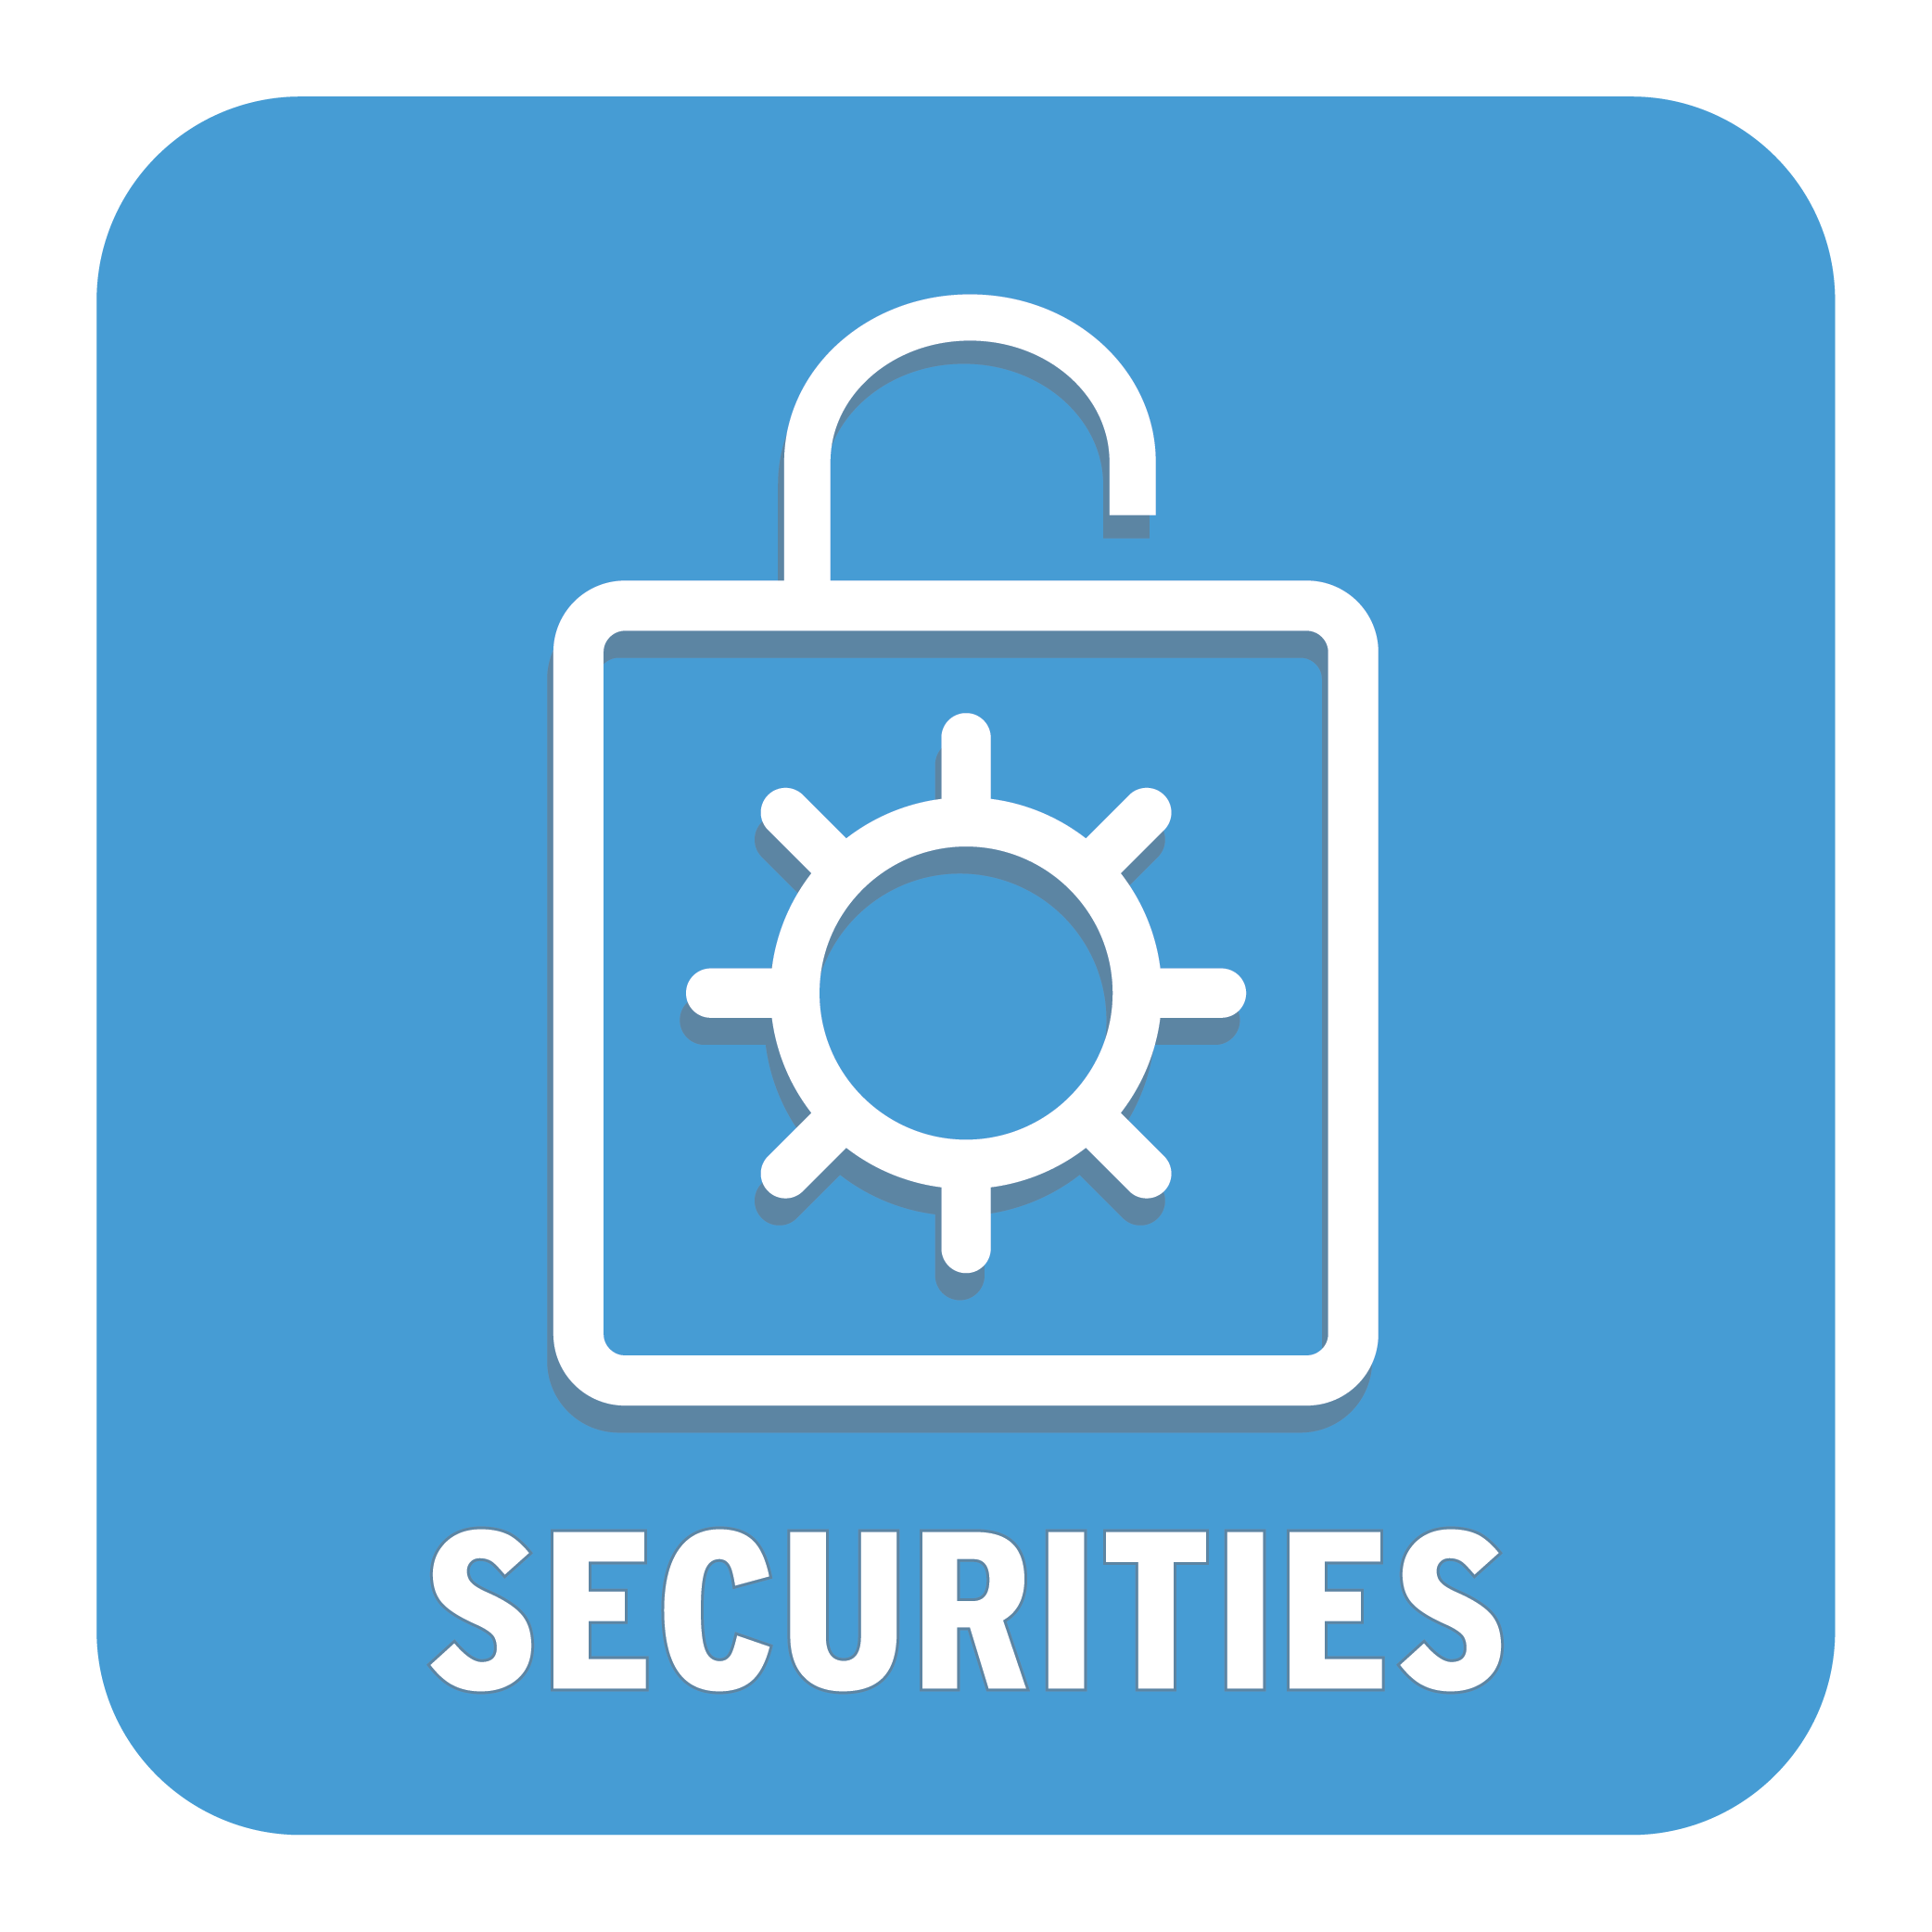 How to Give (Securities)